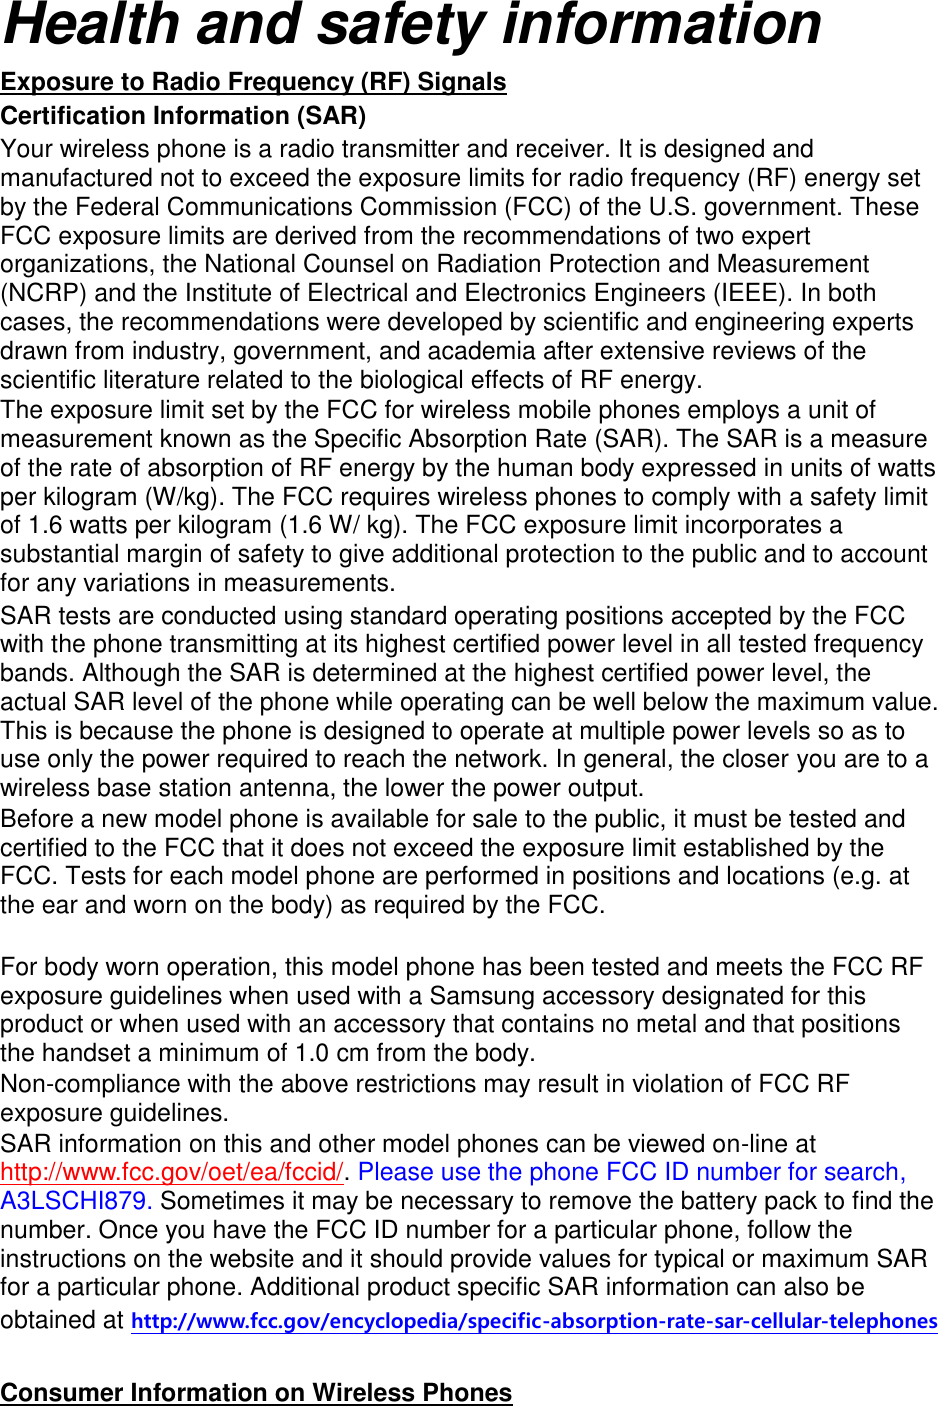 Health and safety information Exposure to Radio Frequency (RF) Signals Certification Information (SAR) Your wireless phone is a radio transmitter and receiver. It is designed and manufactured not to exceed the exposure limits for radio frequency (RF) energy set by the Federal Communications Commission (FCC) of the U.S. government. These FCC exposure limits are derived from the recommendations of two expert organizations, the National Counsel on Radiation Protection and Measurement (NCRP) and the Institute of Electrical and Electronics Engineers (IEEE). In both cases, the recommendations were developed by scientific and engineering experts drawn from industry, government, and academia after extensive reviews of the scientific literature related to the biological effects of RF energy. The exposure limit set by the FCC for wireless mobile phones employs a unit of measurement known as the Specific Absorption Rate (SAR). The SAR is a measure of the rate of absorption of RF energy by the human body expressed in units of watts per kilogram (W/kg). The FCC requires wireless phones to comply with a safety limit of 1.6 watts per kilogram (1.6 W/ kg). The FCC exposure limit incorporates a substantial margin of safety to give additional protection to the public and to account for any variations in measurements. SAR tests are conducted using standard operating positions accepted by the FCC with the phone transmitting at its highest certified power level in all tested frequency bands. Although the SAR is determined at the highest certified power level, the actual SAR level of the phone while operating can be well below the maximum value. This is because the phone is designed to operate at multiple power levels so as to use only the power required to reach the network. In general, the closer you are to a wireless base station antenna, the lower the power output. Before a new model phone is available for sale to the public, it must be tested and certified to the FCC that it does not exceed the exposure limit established by the FCC. Tests for each model phone are performed in positions and locations (e.g. at the ear and worn on the body) as required by the FCC.      For body worn operation, this model phone has been tested and meets the FCC RF exposure guidelines when used with a Samsung accessory designated for this product or when used with an accessory that contains no metal and that positions the handset a minimum of 1.0 cm from the body.   Non-compliance with the above restrictions may result in violation of FCC RF exposure guidelines. SAR information on this and other model phones can be viewed on-line at http://www.fcc.gov/oet/ea/fccid/. Please use the phone FCC ID number for search, A3LSCHI879. Sometimes it may be necessary to remove the battery pack to find the number. Once you have the FCC ID number for a particular phone, follow the instructions on the website and it should provide values for typical or maximum SAR for a particular phone. Additional product specific SAR information can also be obtained at http://www.fcc.gov/encyclopedia/specific-absorption-rate-sar-cellular-telephones  Consumer Information on Wireless Phones 